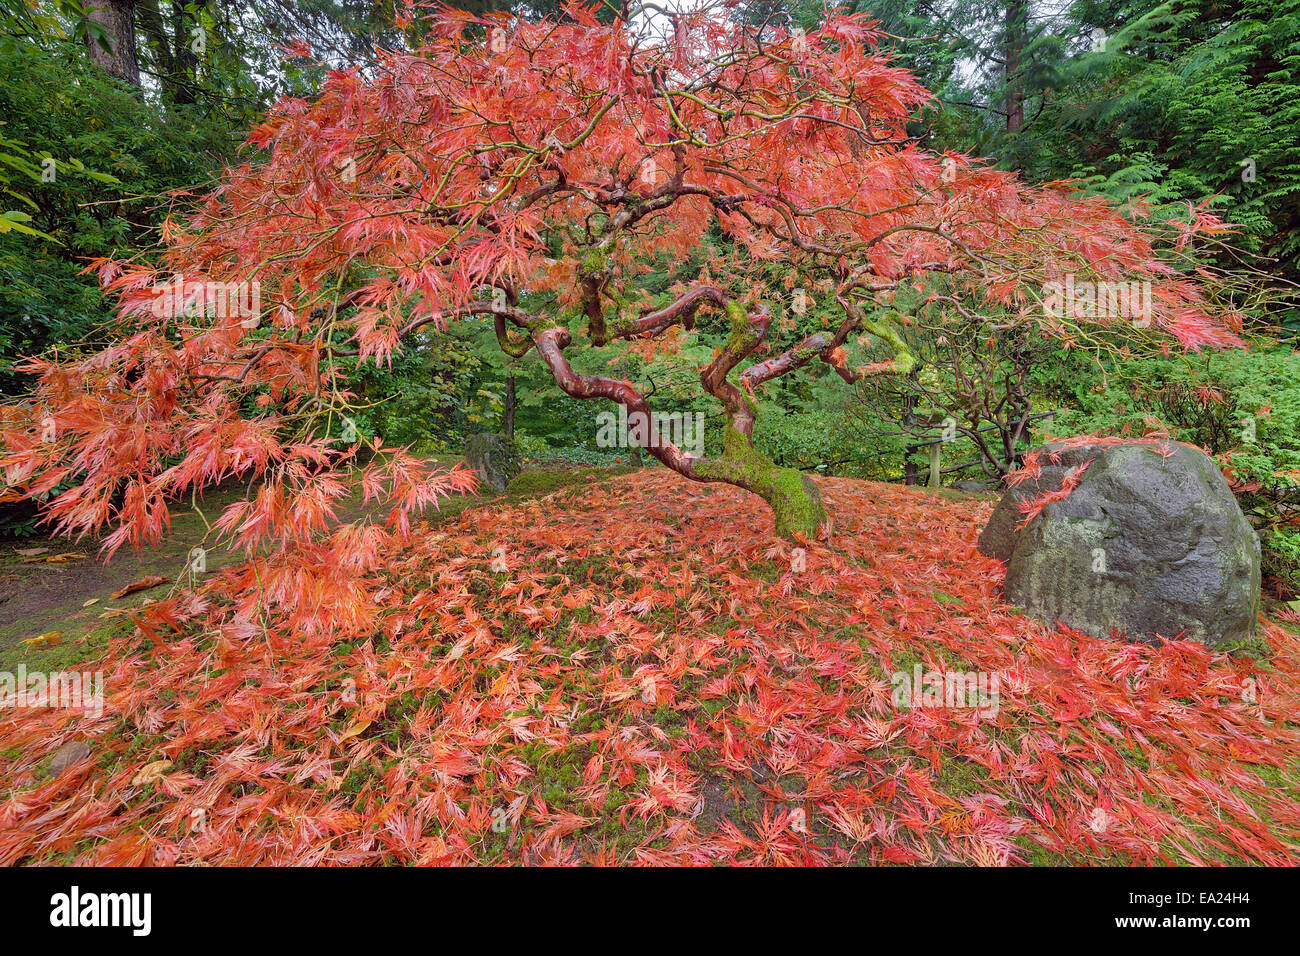 Japanese Lace Leaf Maple Tree Fall Foliage Colors at the Portland Japanese Garden in Autumn Stock Photo